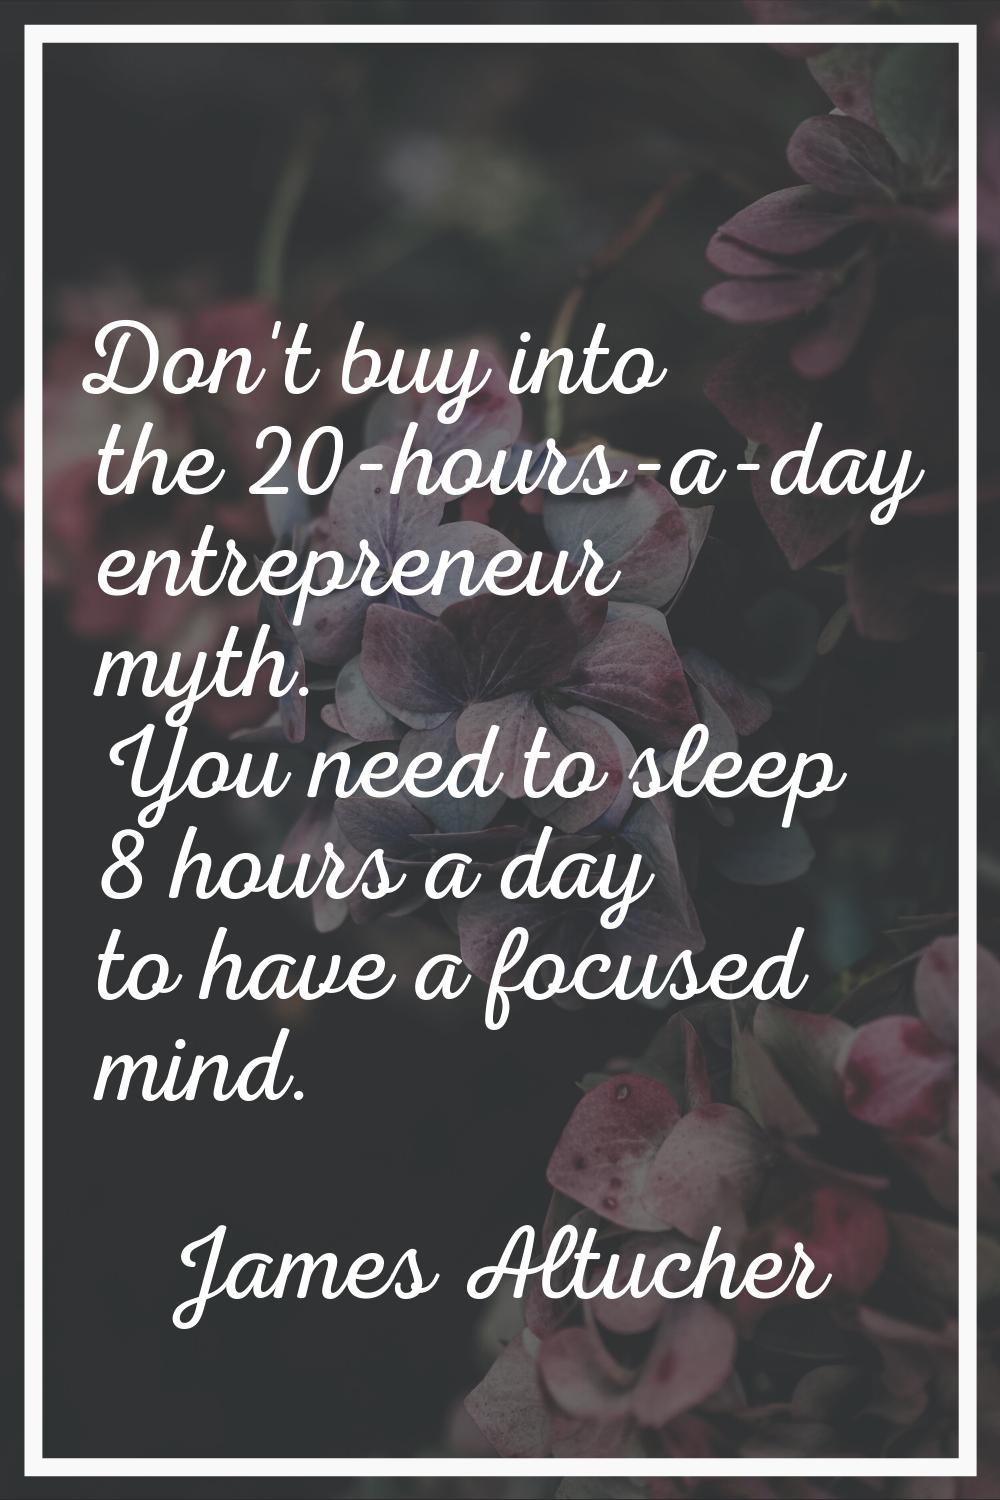 Don't buy into the 20-hours-a-day entrepreneur myth. You need to sleep 8 hours a day to have a focu